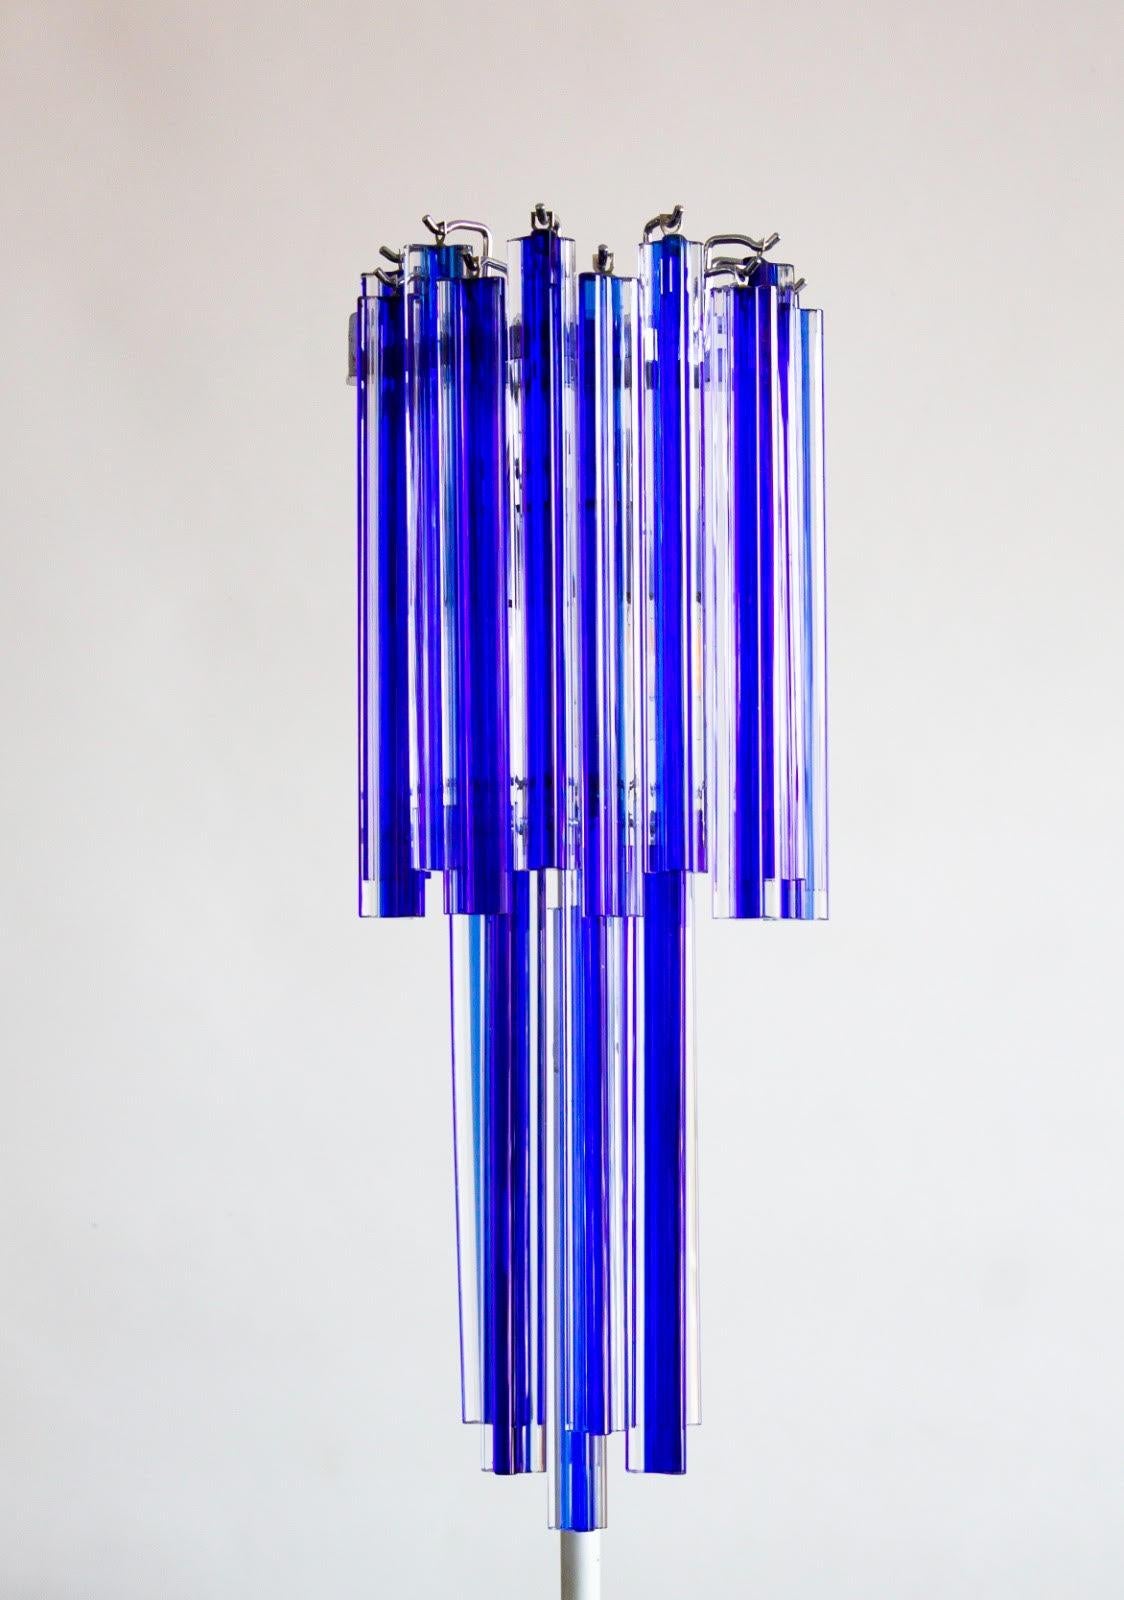 Blue Sconce in blown Murano glass Giovanni Dalla Fina, 1990s
This is a fantastic sconce entirely handcrafted in blown Murano glass, designed and manufactured by the italian artist and designer Giovanni Dalla Fina. The sconce is constituted of